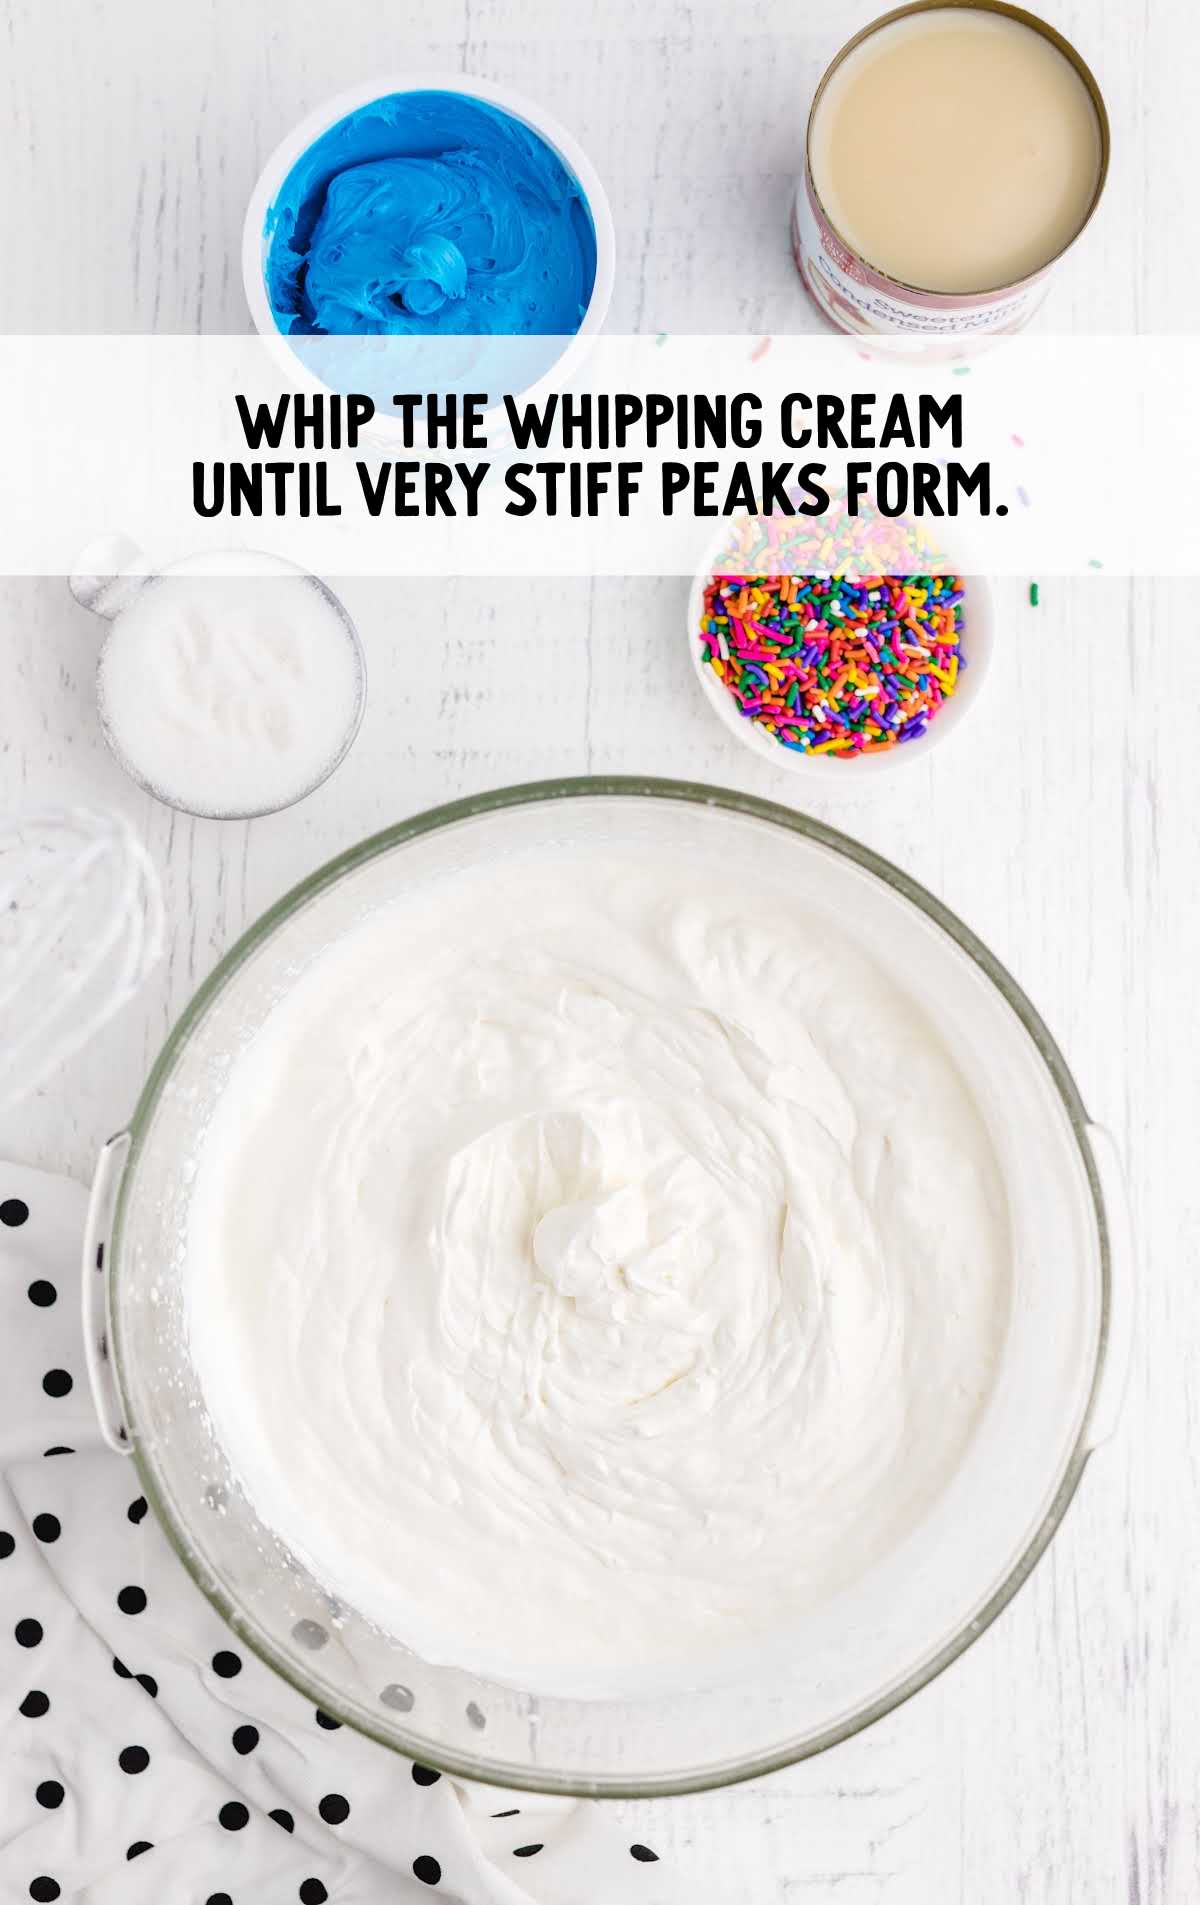 whipping cream whipped in a cup